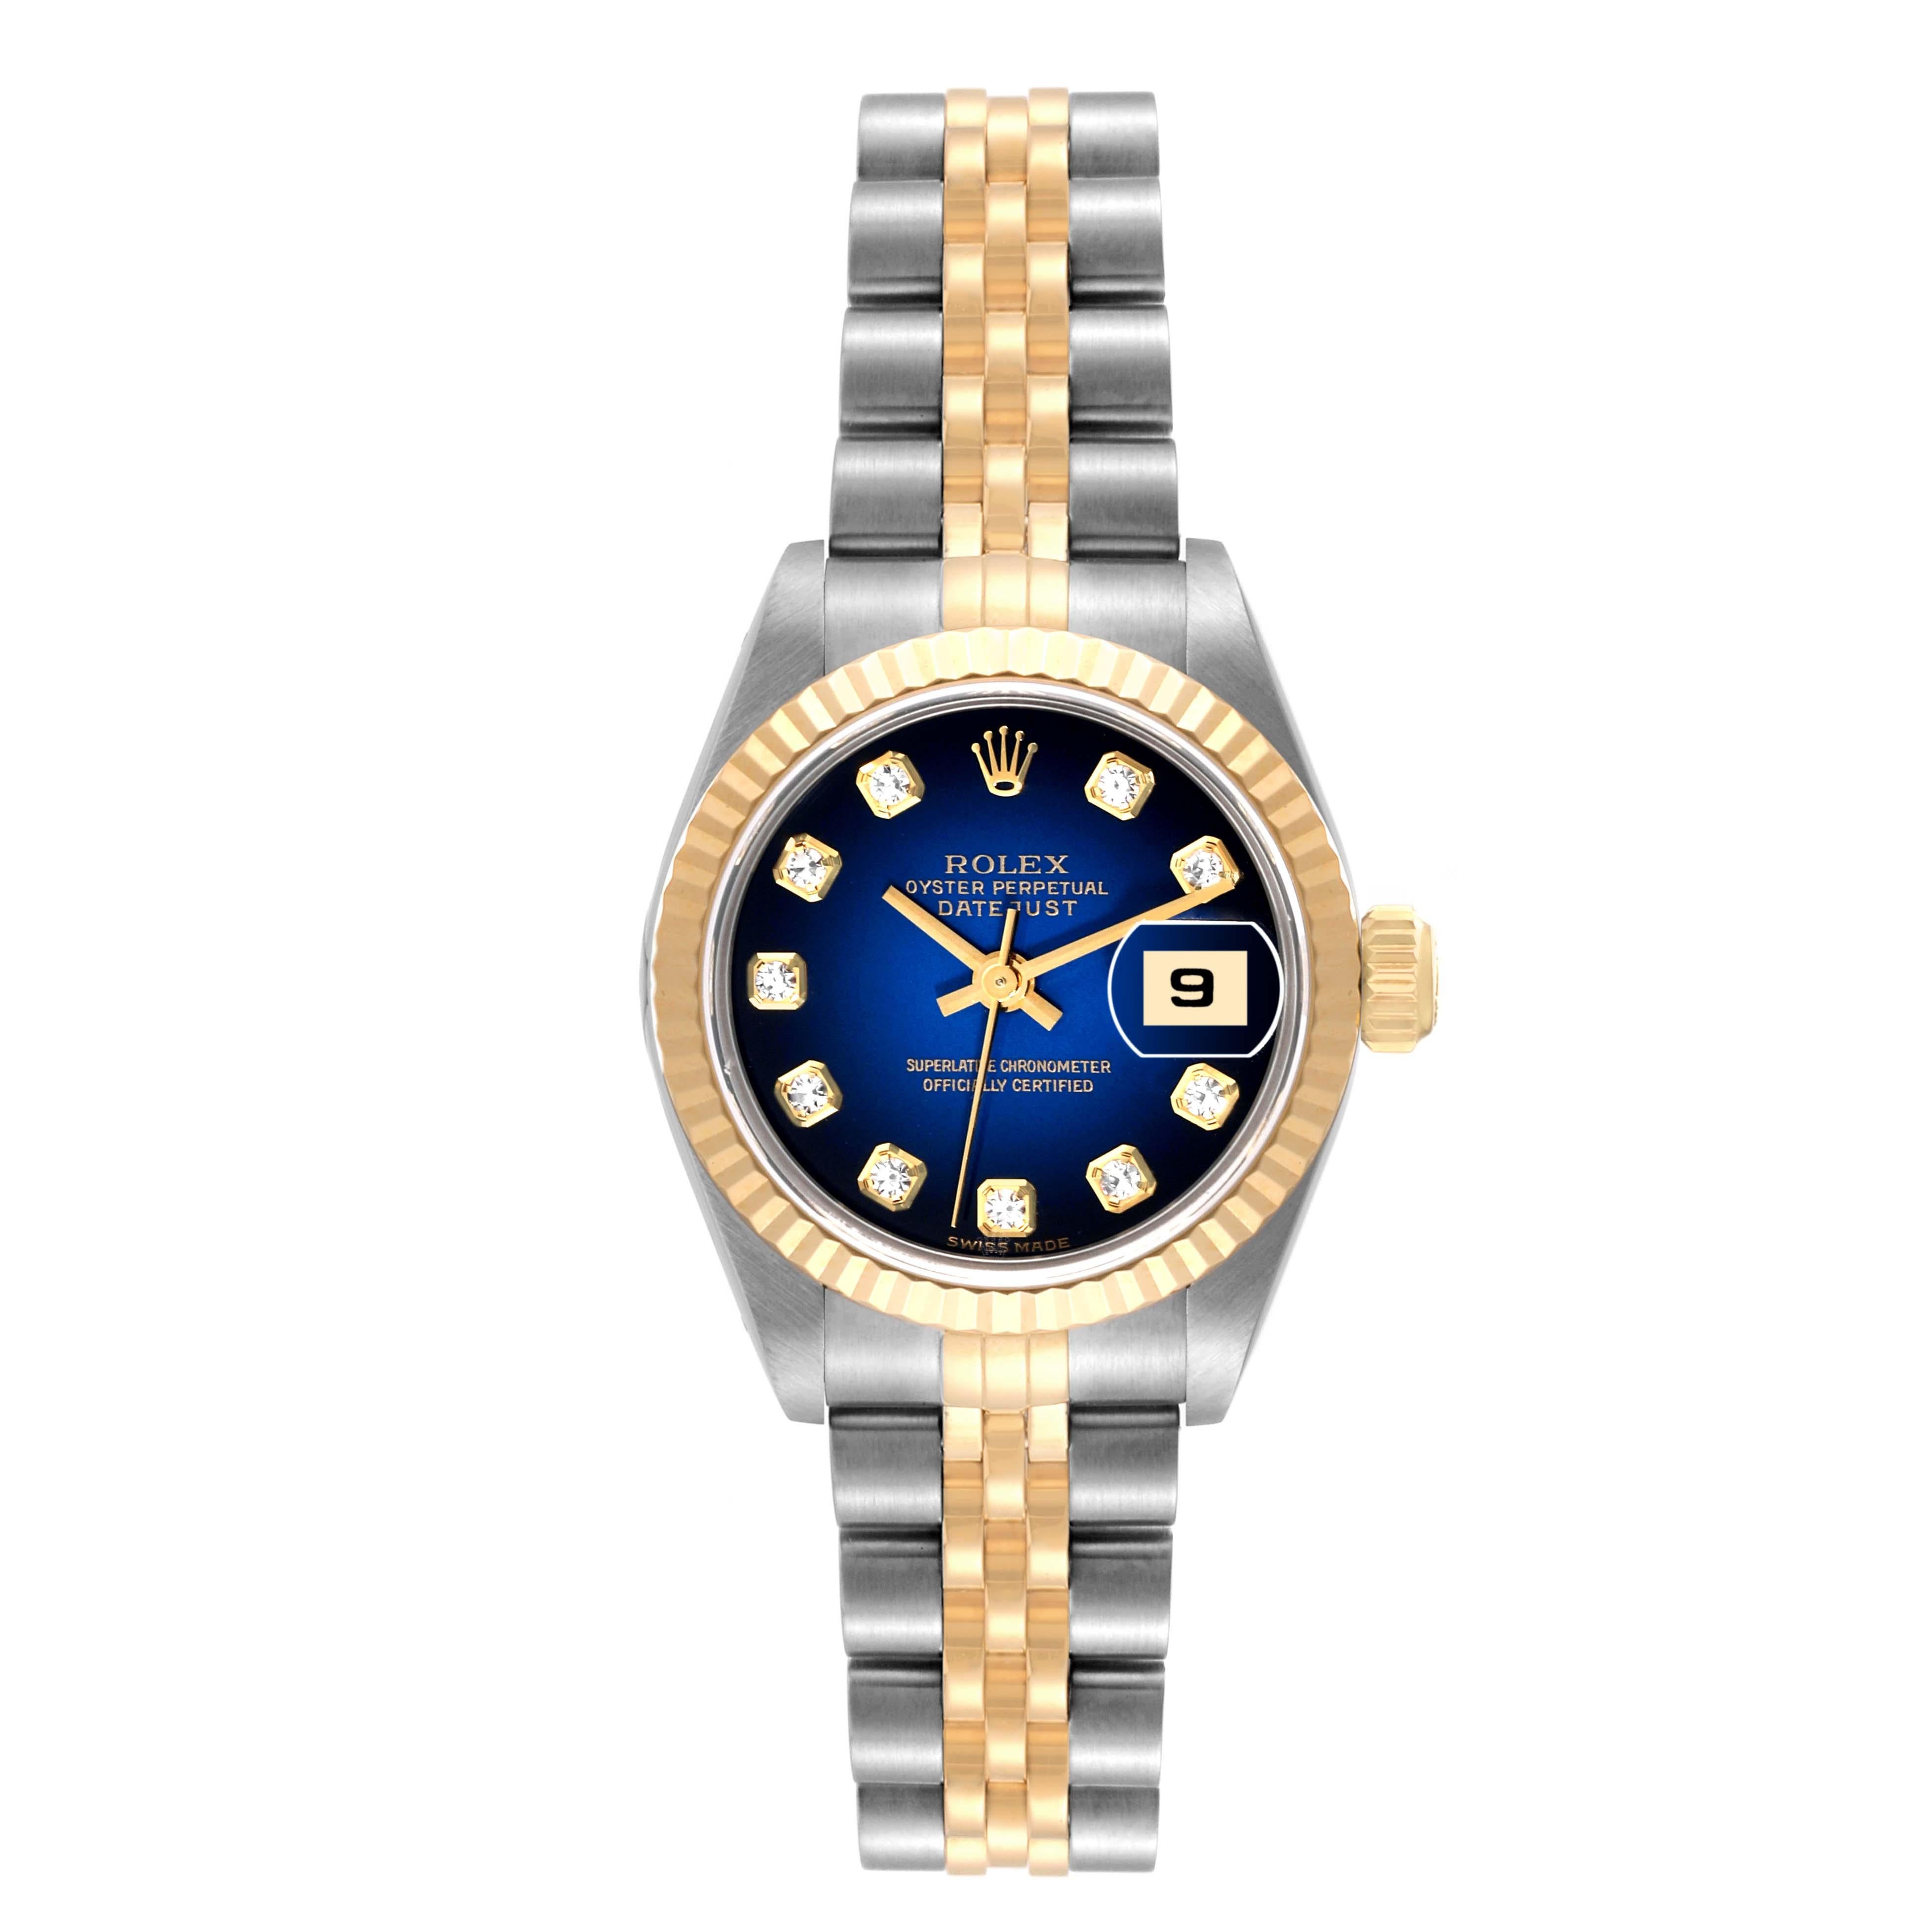 Rolex Datejust Steel Yellow Gold Blue Vignette Diamond Dial Ladies Watch 79173. Officially certified chronometer automatic self-winding movement. Stainless steel oyster case 26.0 mm in diameter. Rolex logo on an 18K yellow gold crown. 18k yellow